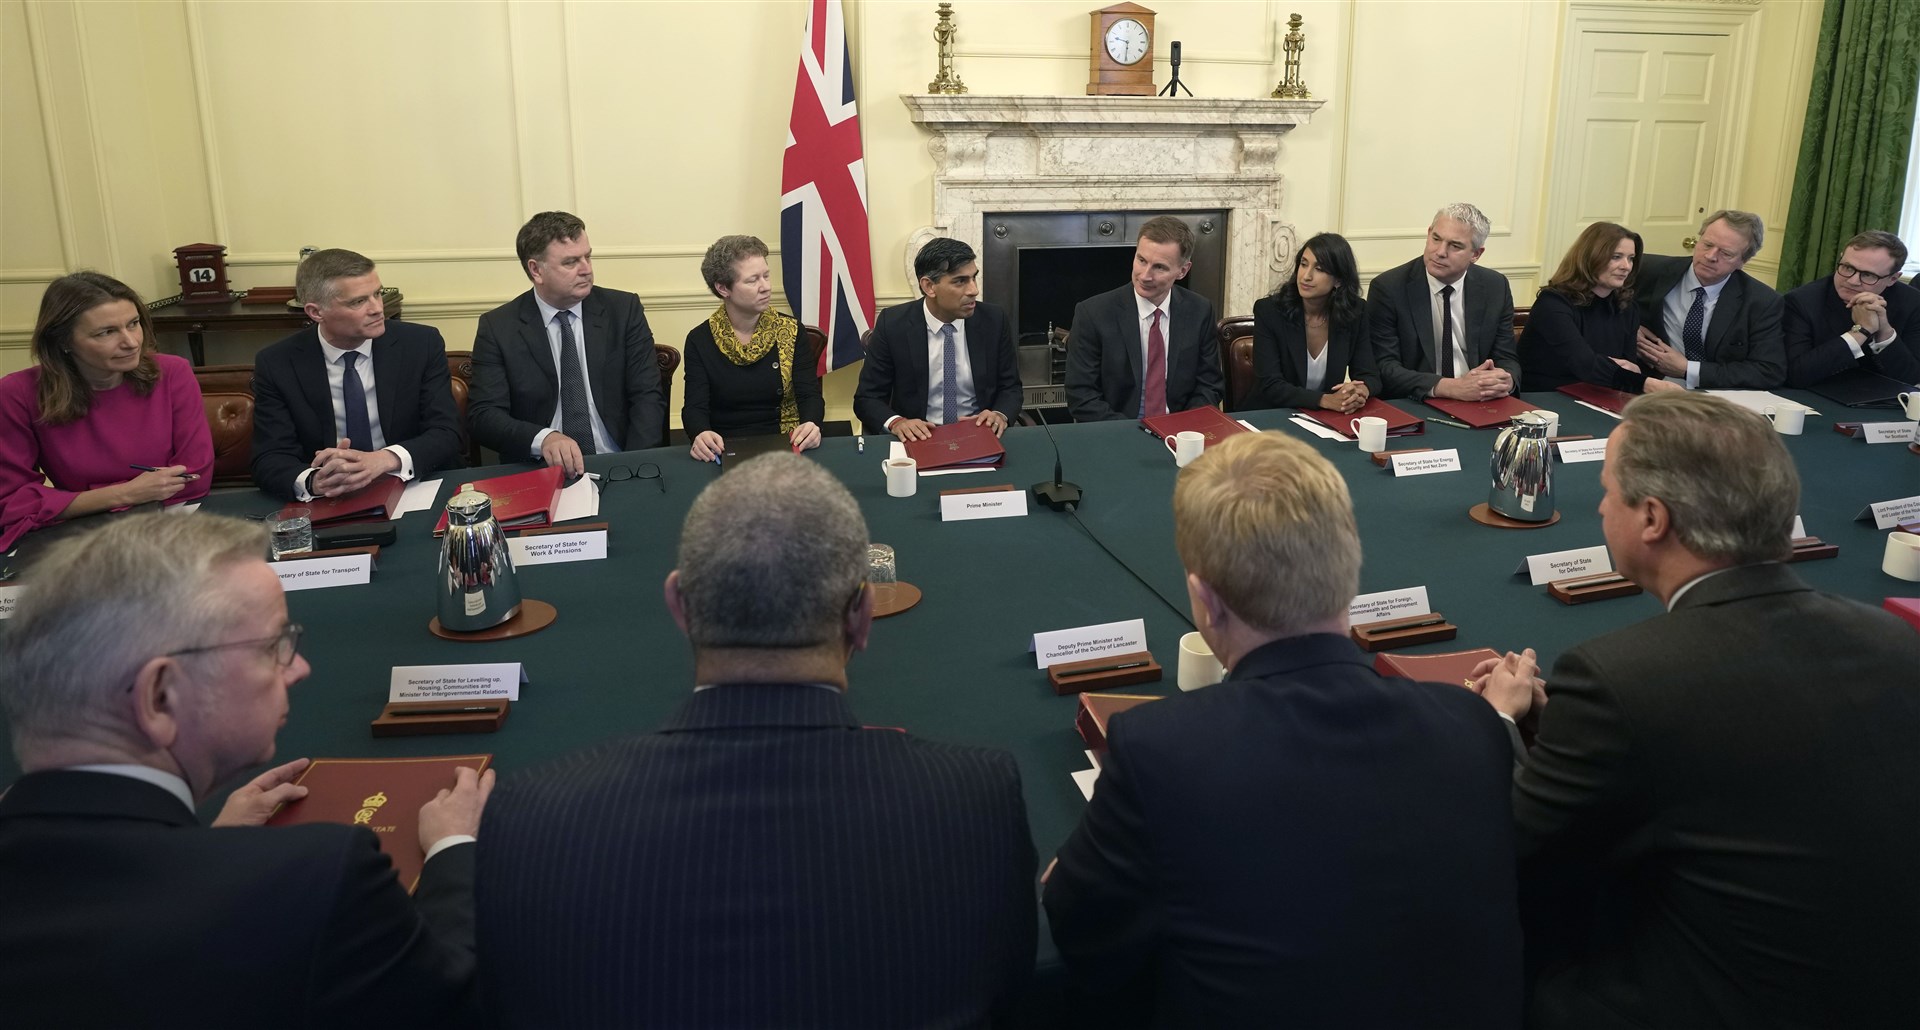 A meeting of the new-look Cabinet following a reshuffle on Monday, at 10 Downing Street (Kin Cheung/PA)